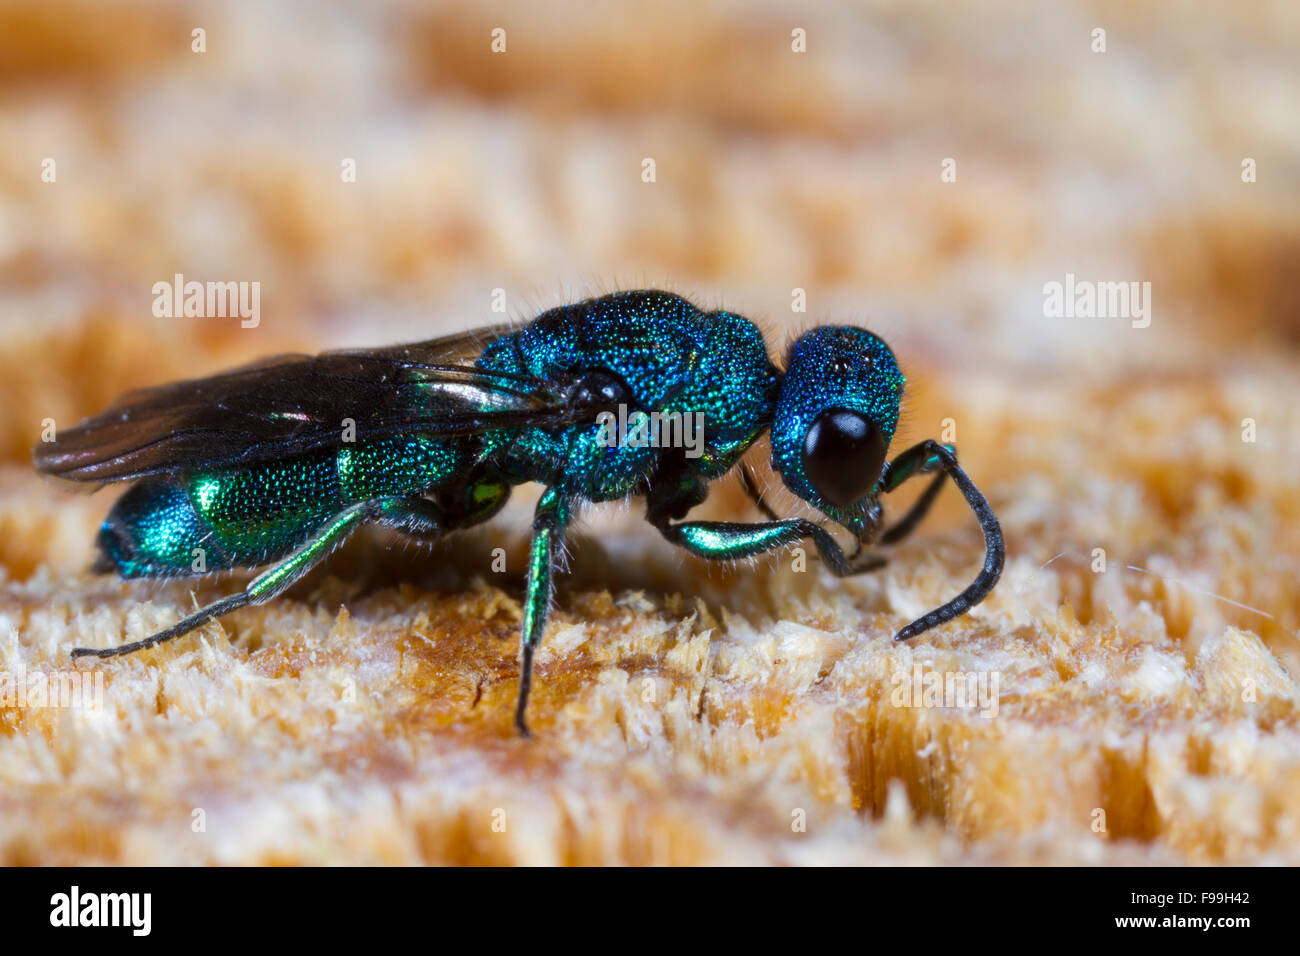 Blue Jewel or Cuckoo Wasp (Trichrysis cyanea) adult female on wood, using antenna to search for nests of host wasps. Stock Photo